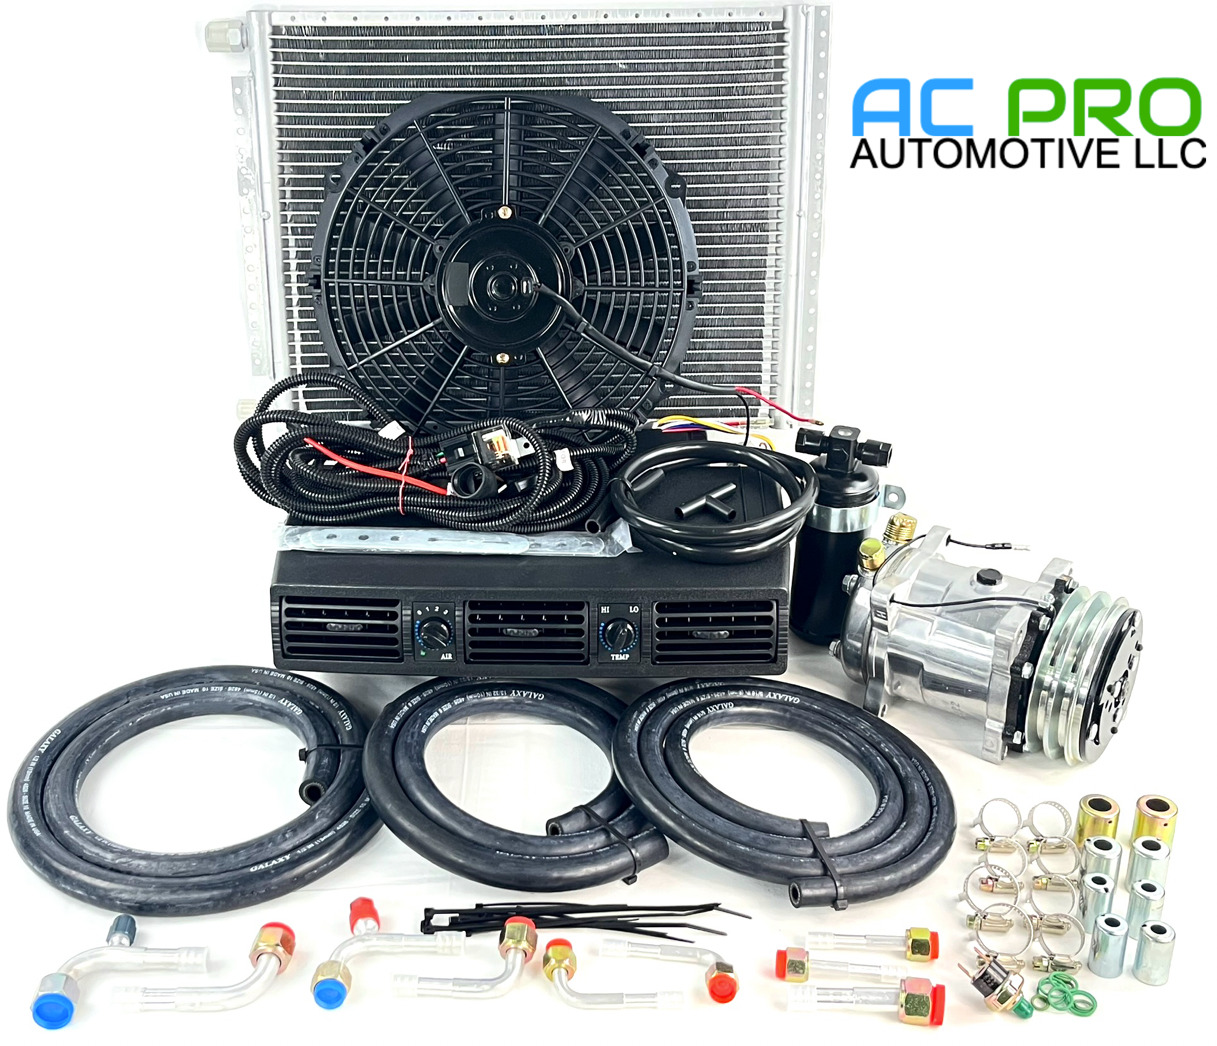 A/C KIT UNIVERSAL UNDER DASH EVAPORATOR 404-100  HEAT & COOL ELECTRICAL HARNESS